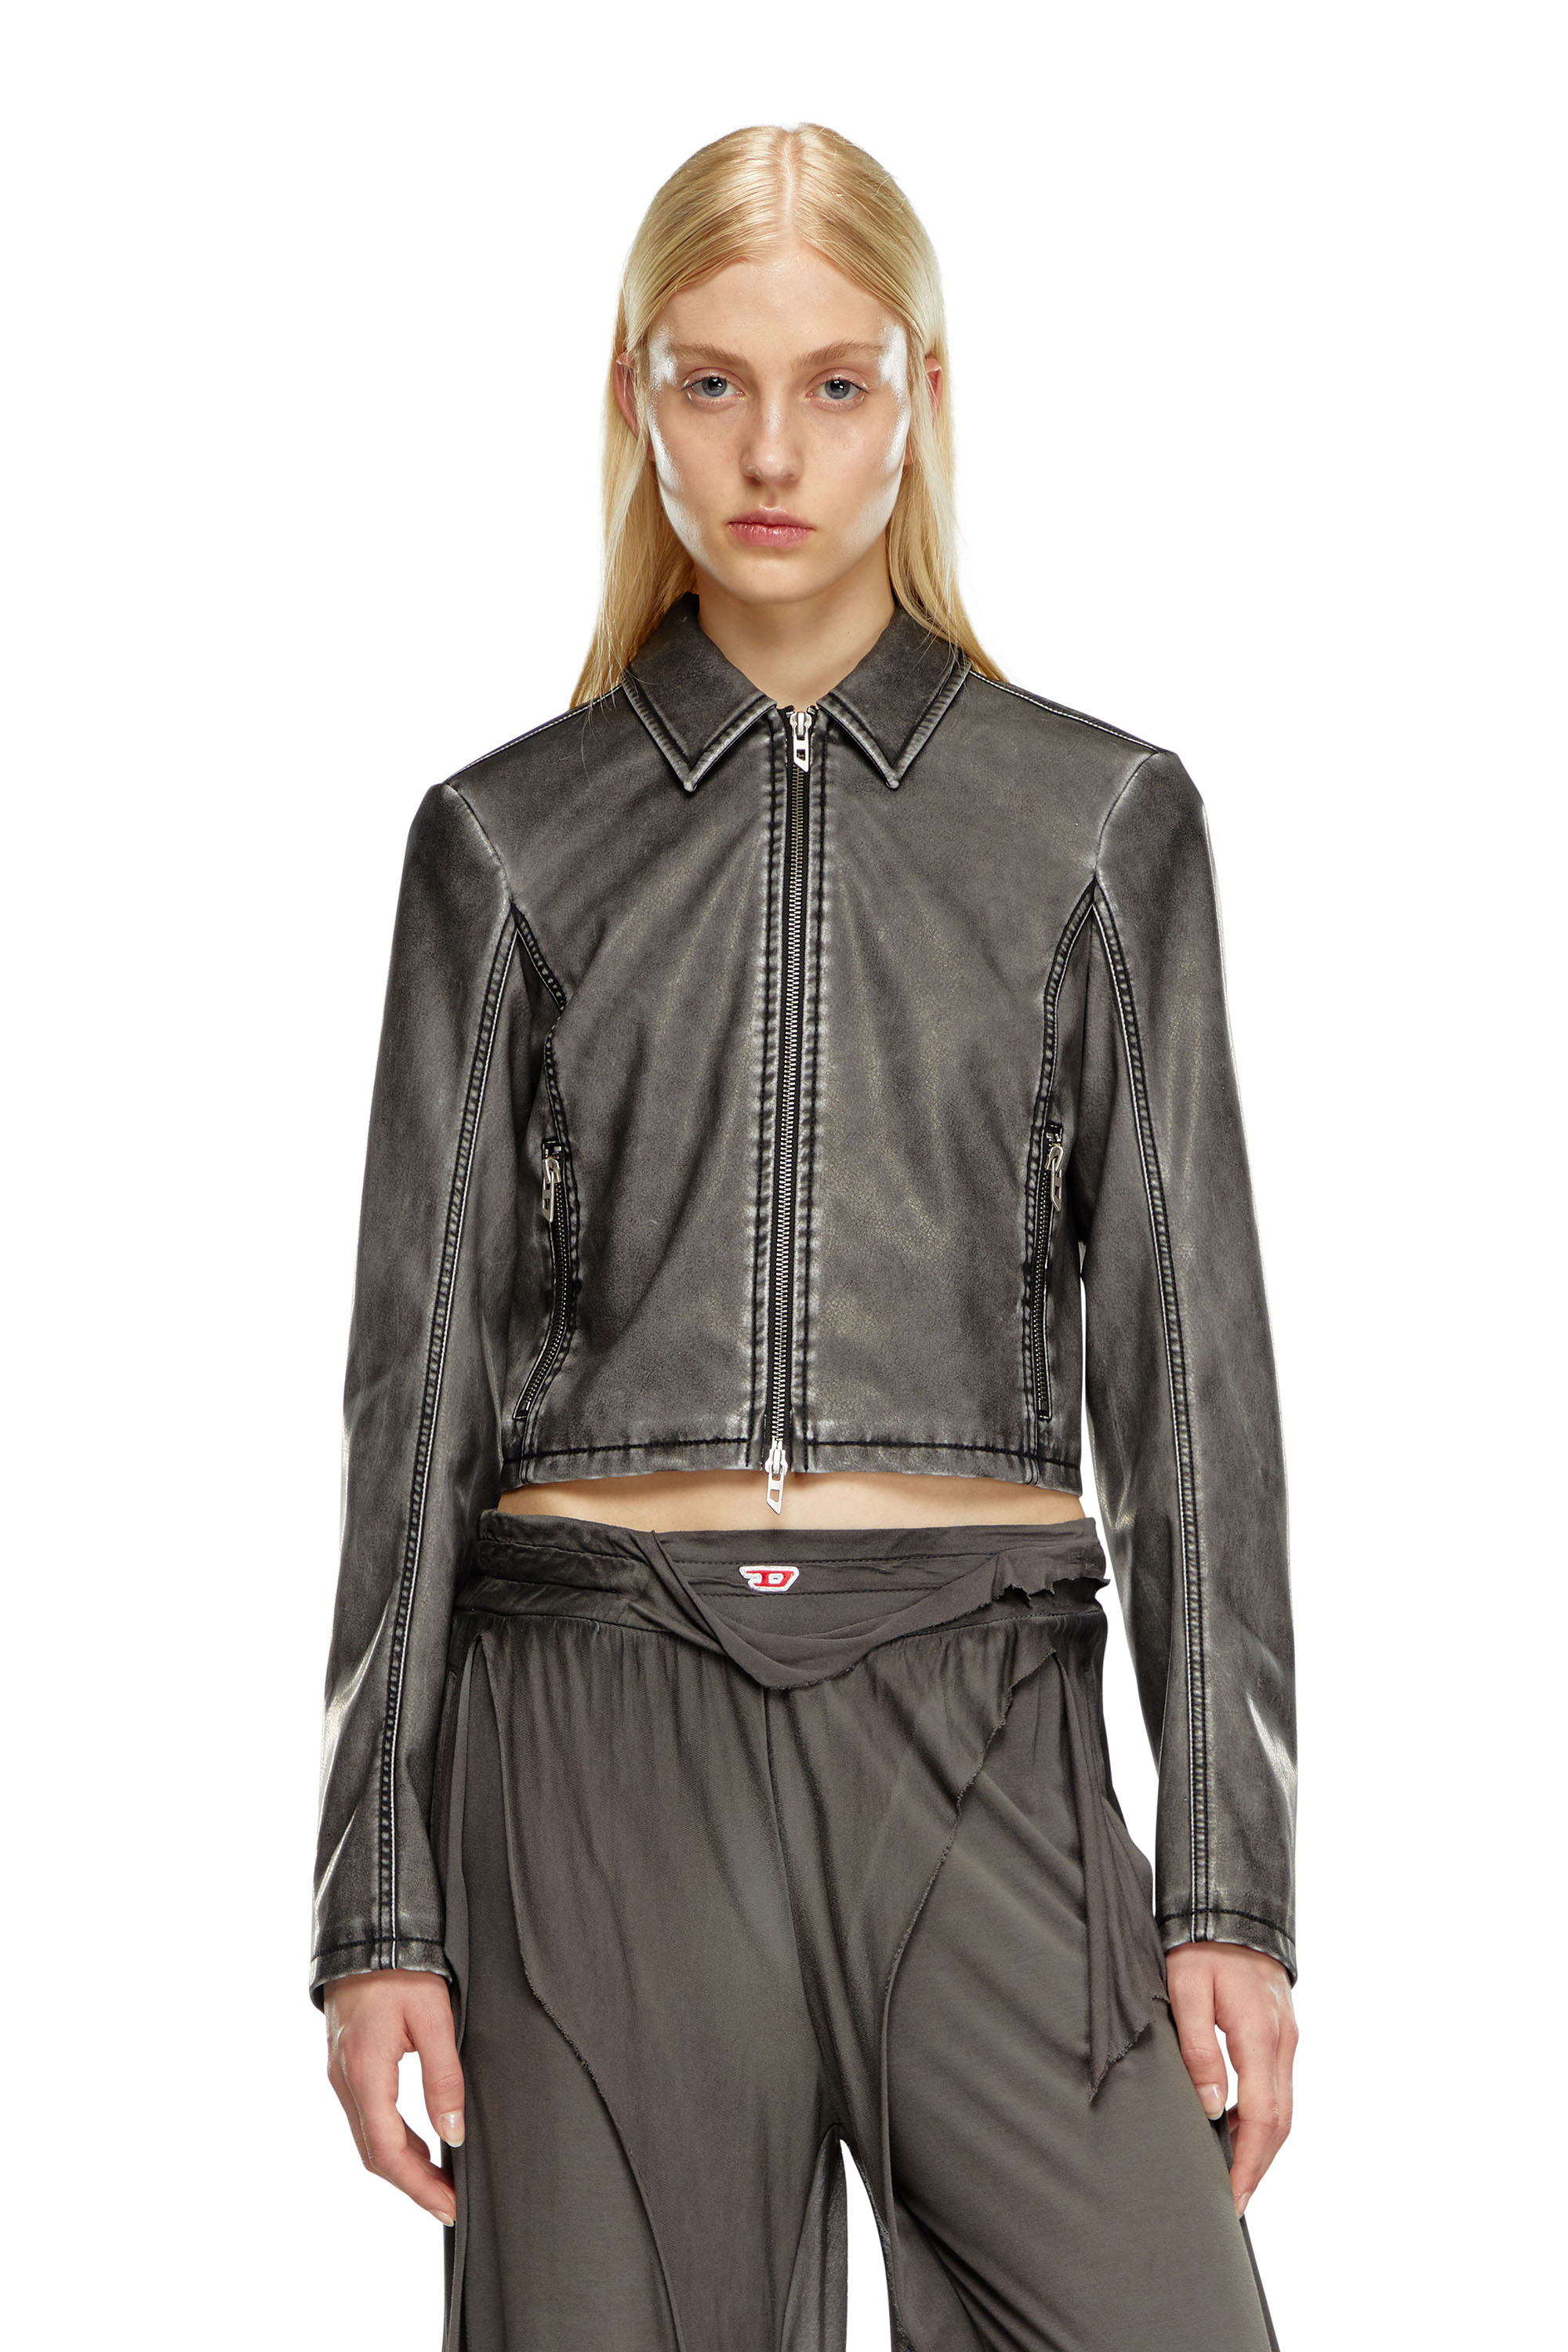 Diesel - G-OTA, Female Cropped jacket in washed tech fabric in ブラック - Image 1